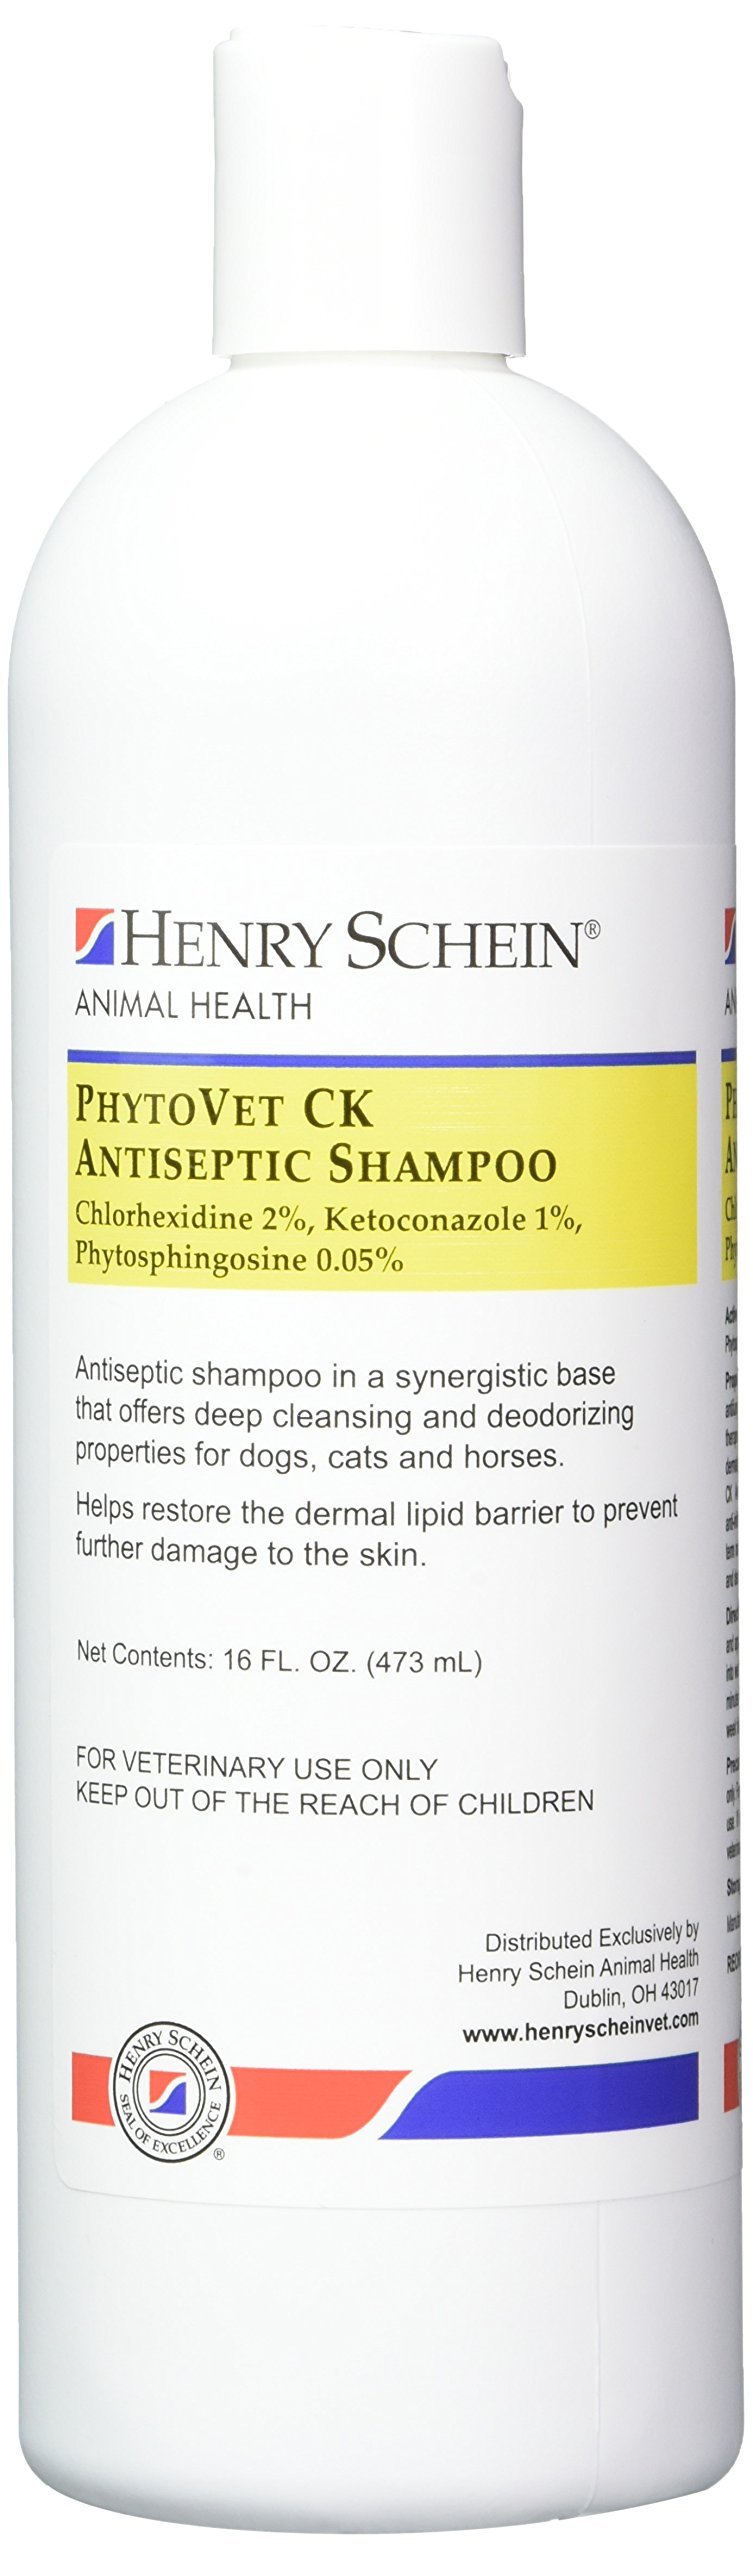 [Australia] - Butler Phytovet CK Antiseptic Shampoo for Dogs Cats & Horses - Antibacterial Antifungal & Antimicrobial Support - 16 oz 